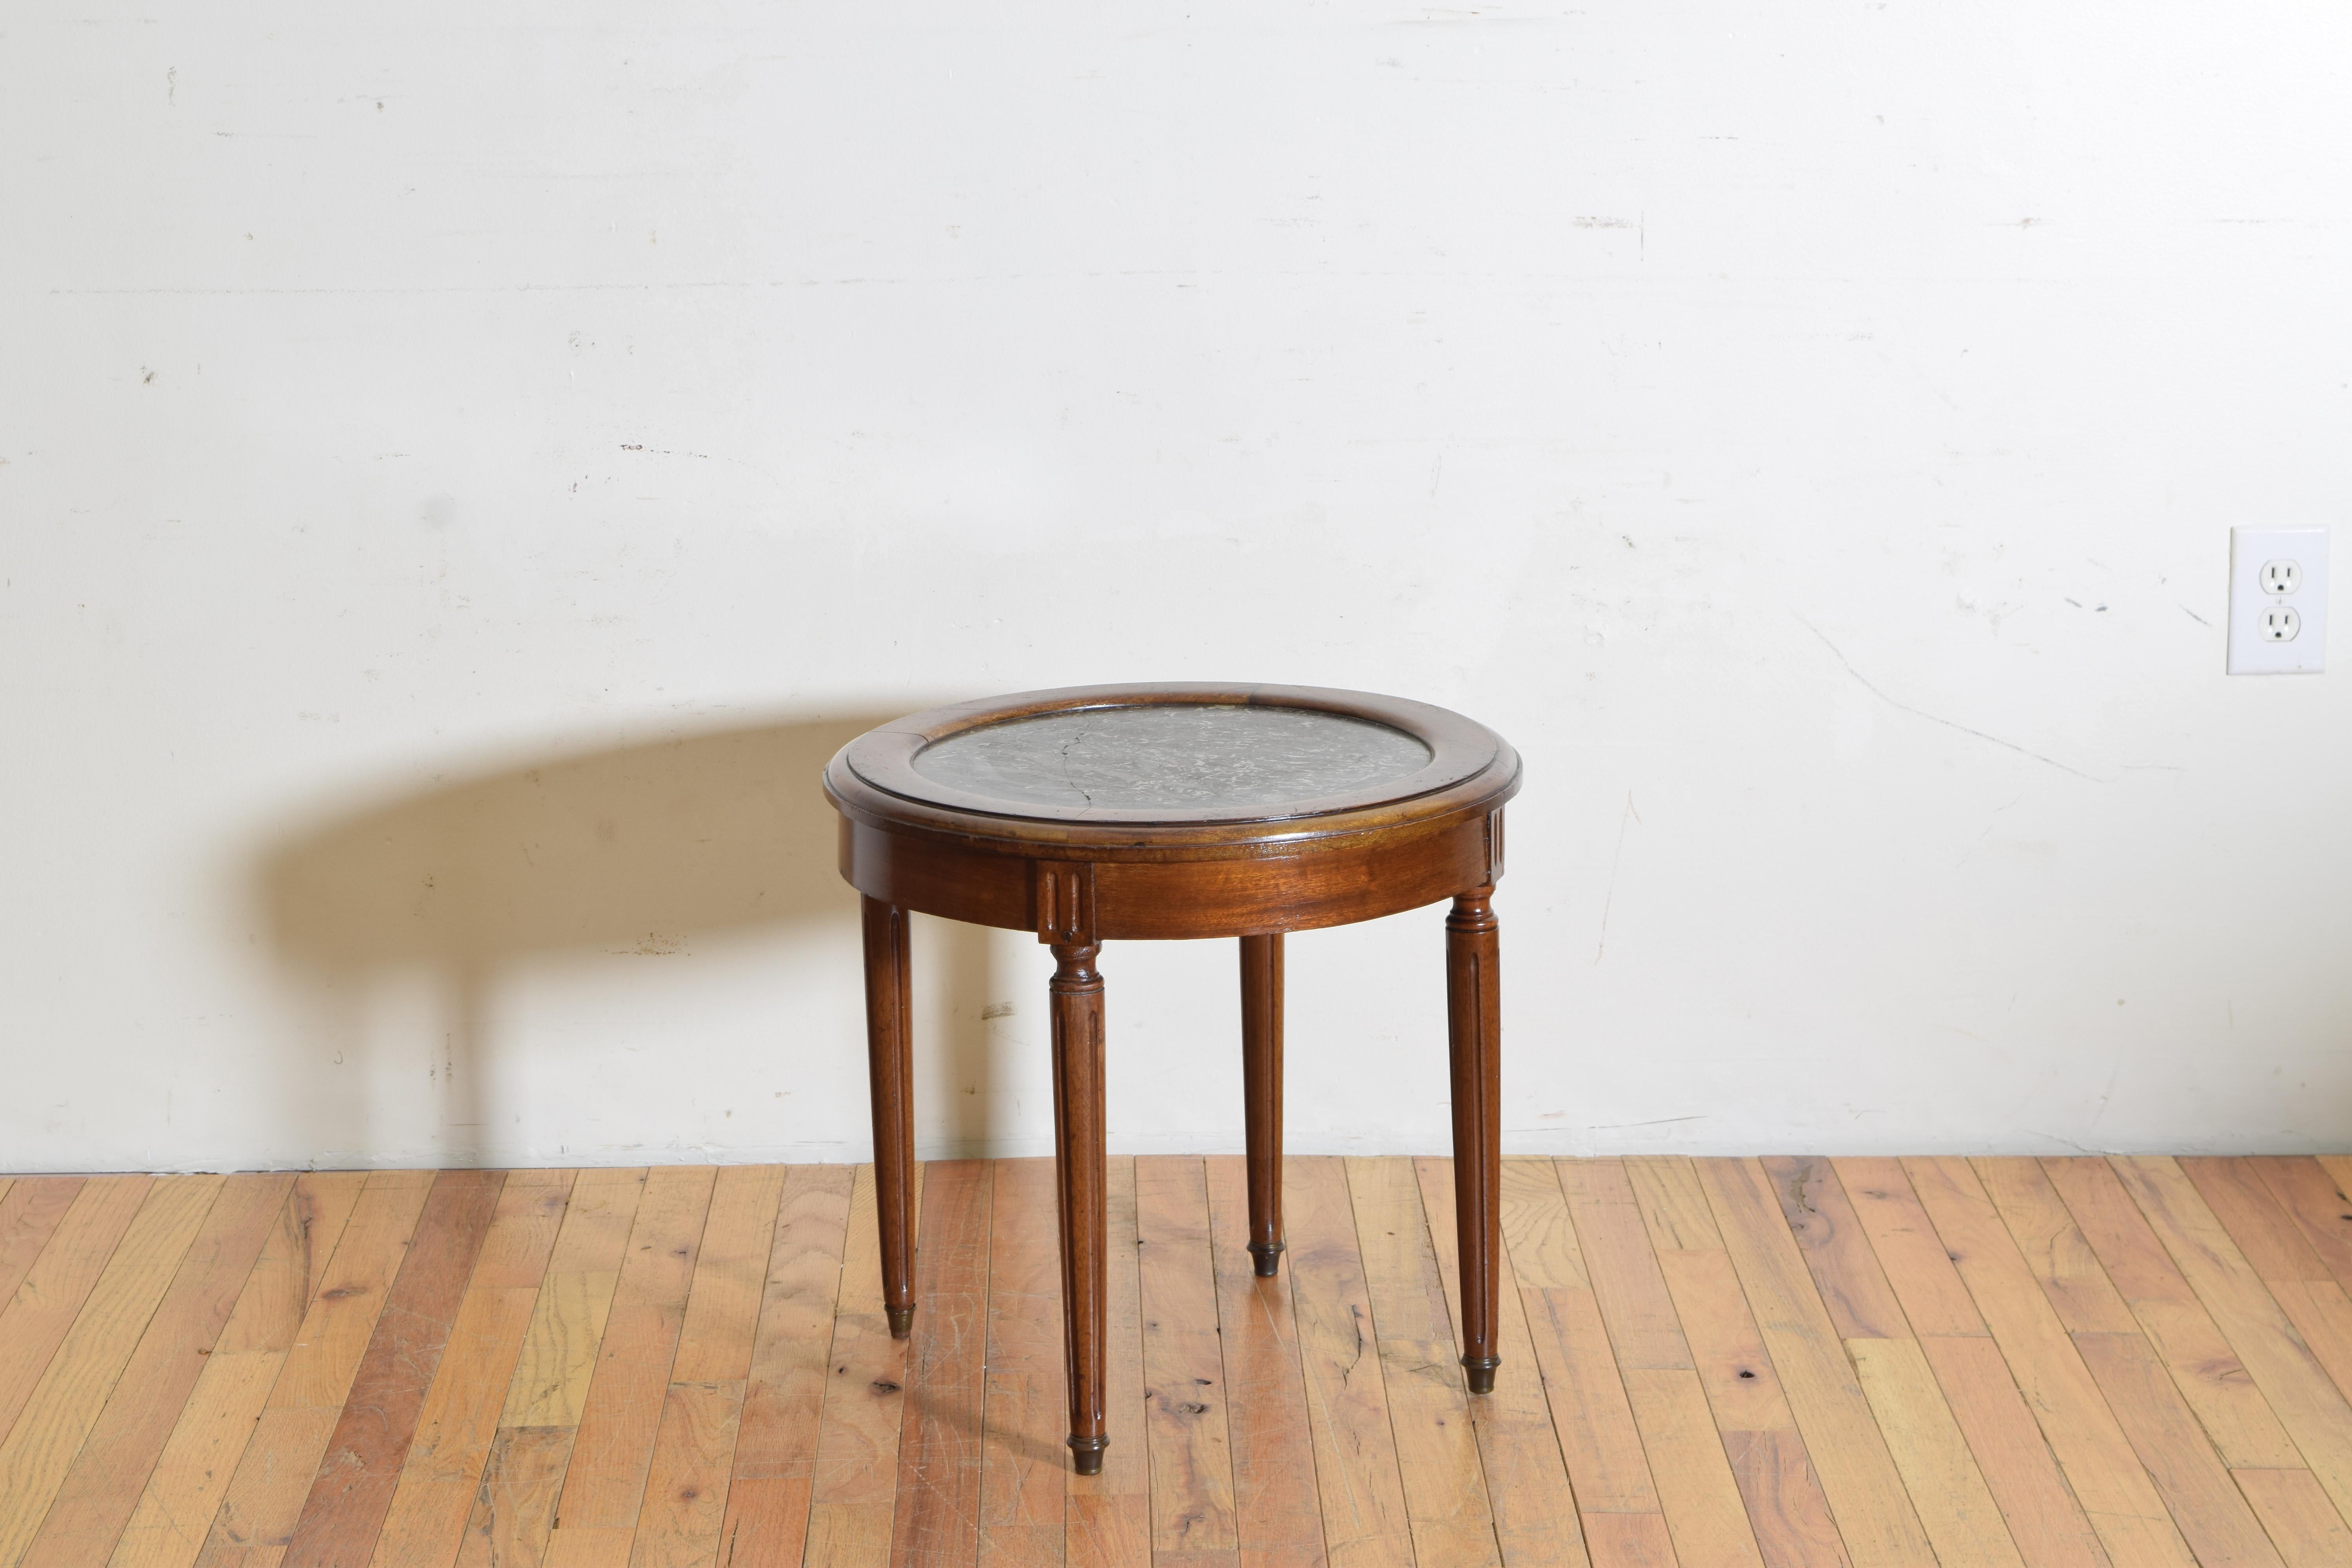 The circular top with a raised edge and inset marble top, the apron with fluting and raised on circular fluted legs ending in brass casters.